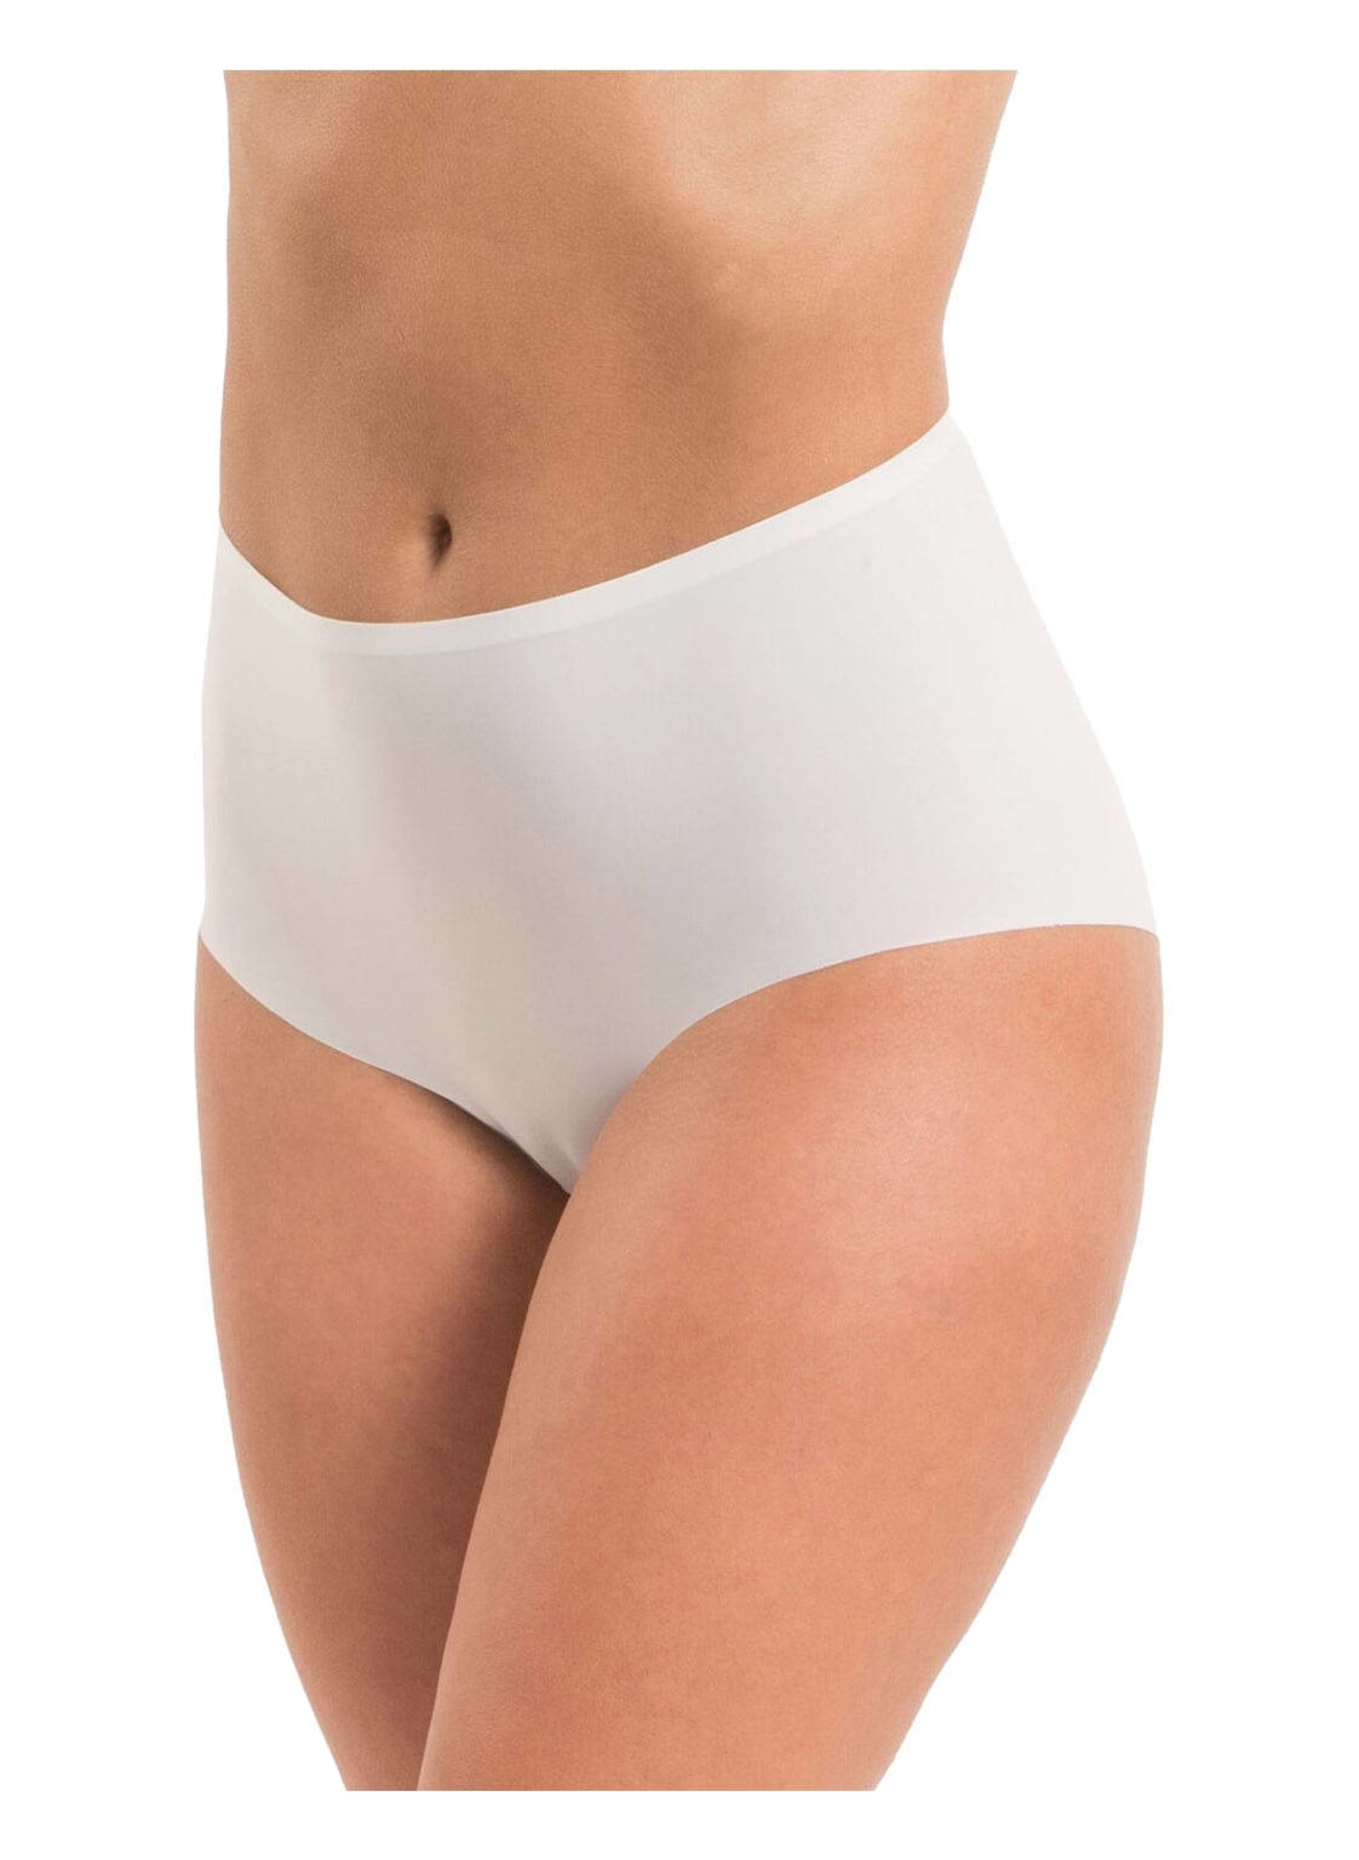 MAGIC Bodyfashion 2er-Pack Panties DREAM INVISIBLES, Farbe: WEISS (Bild 4)